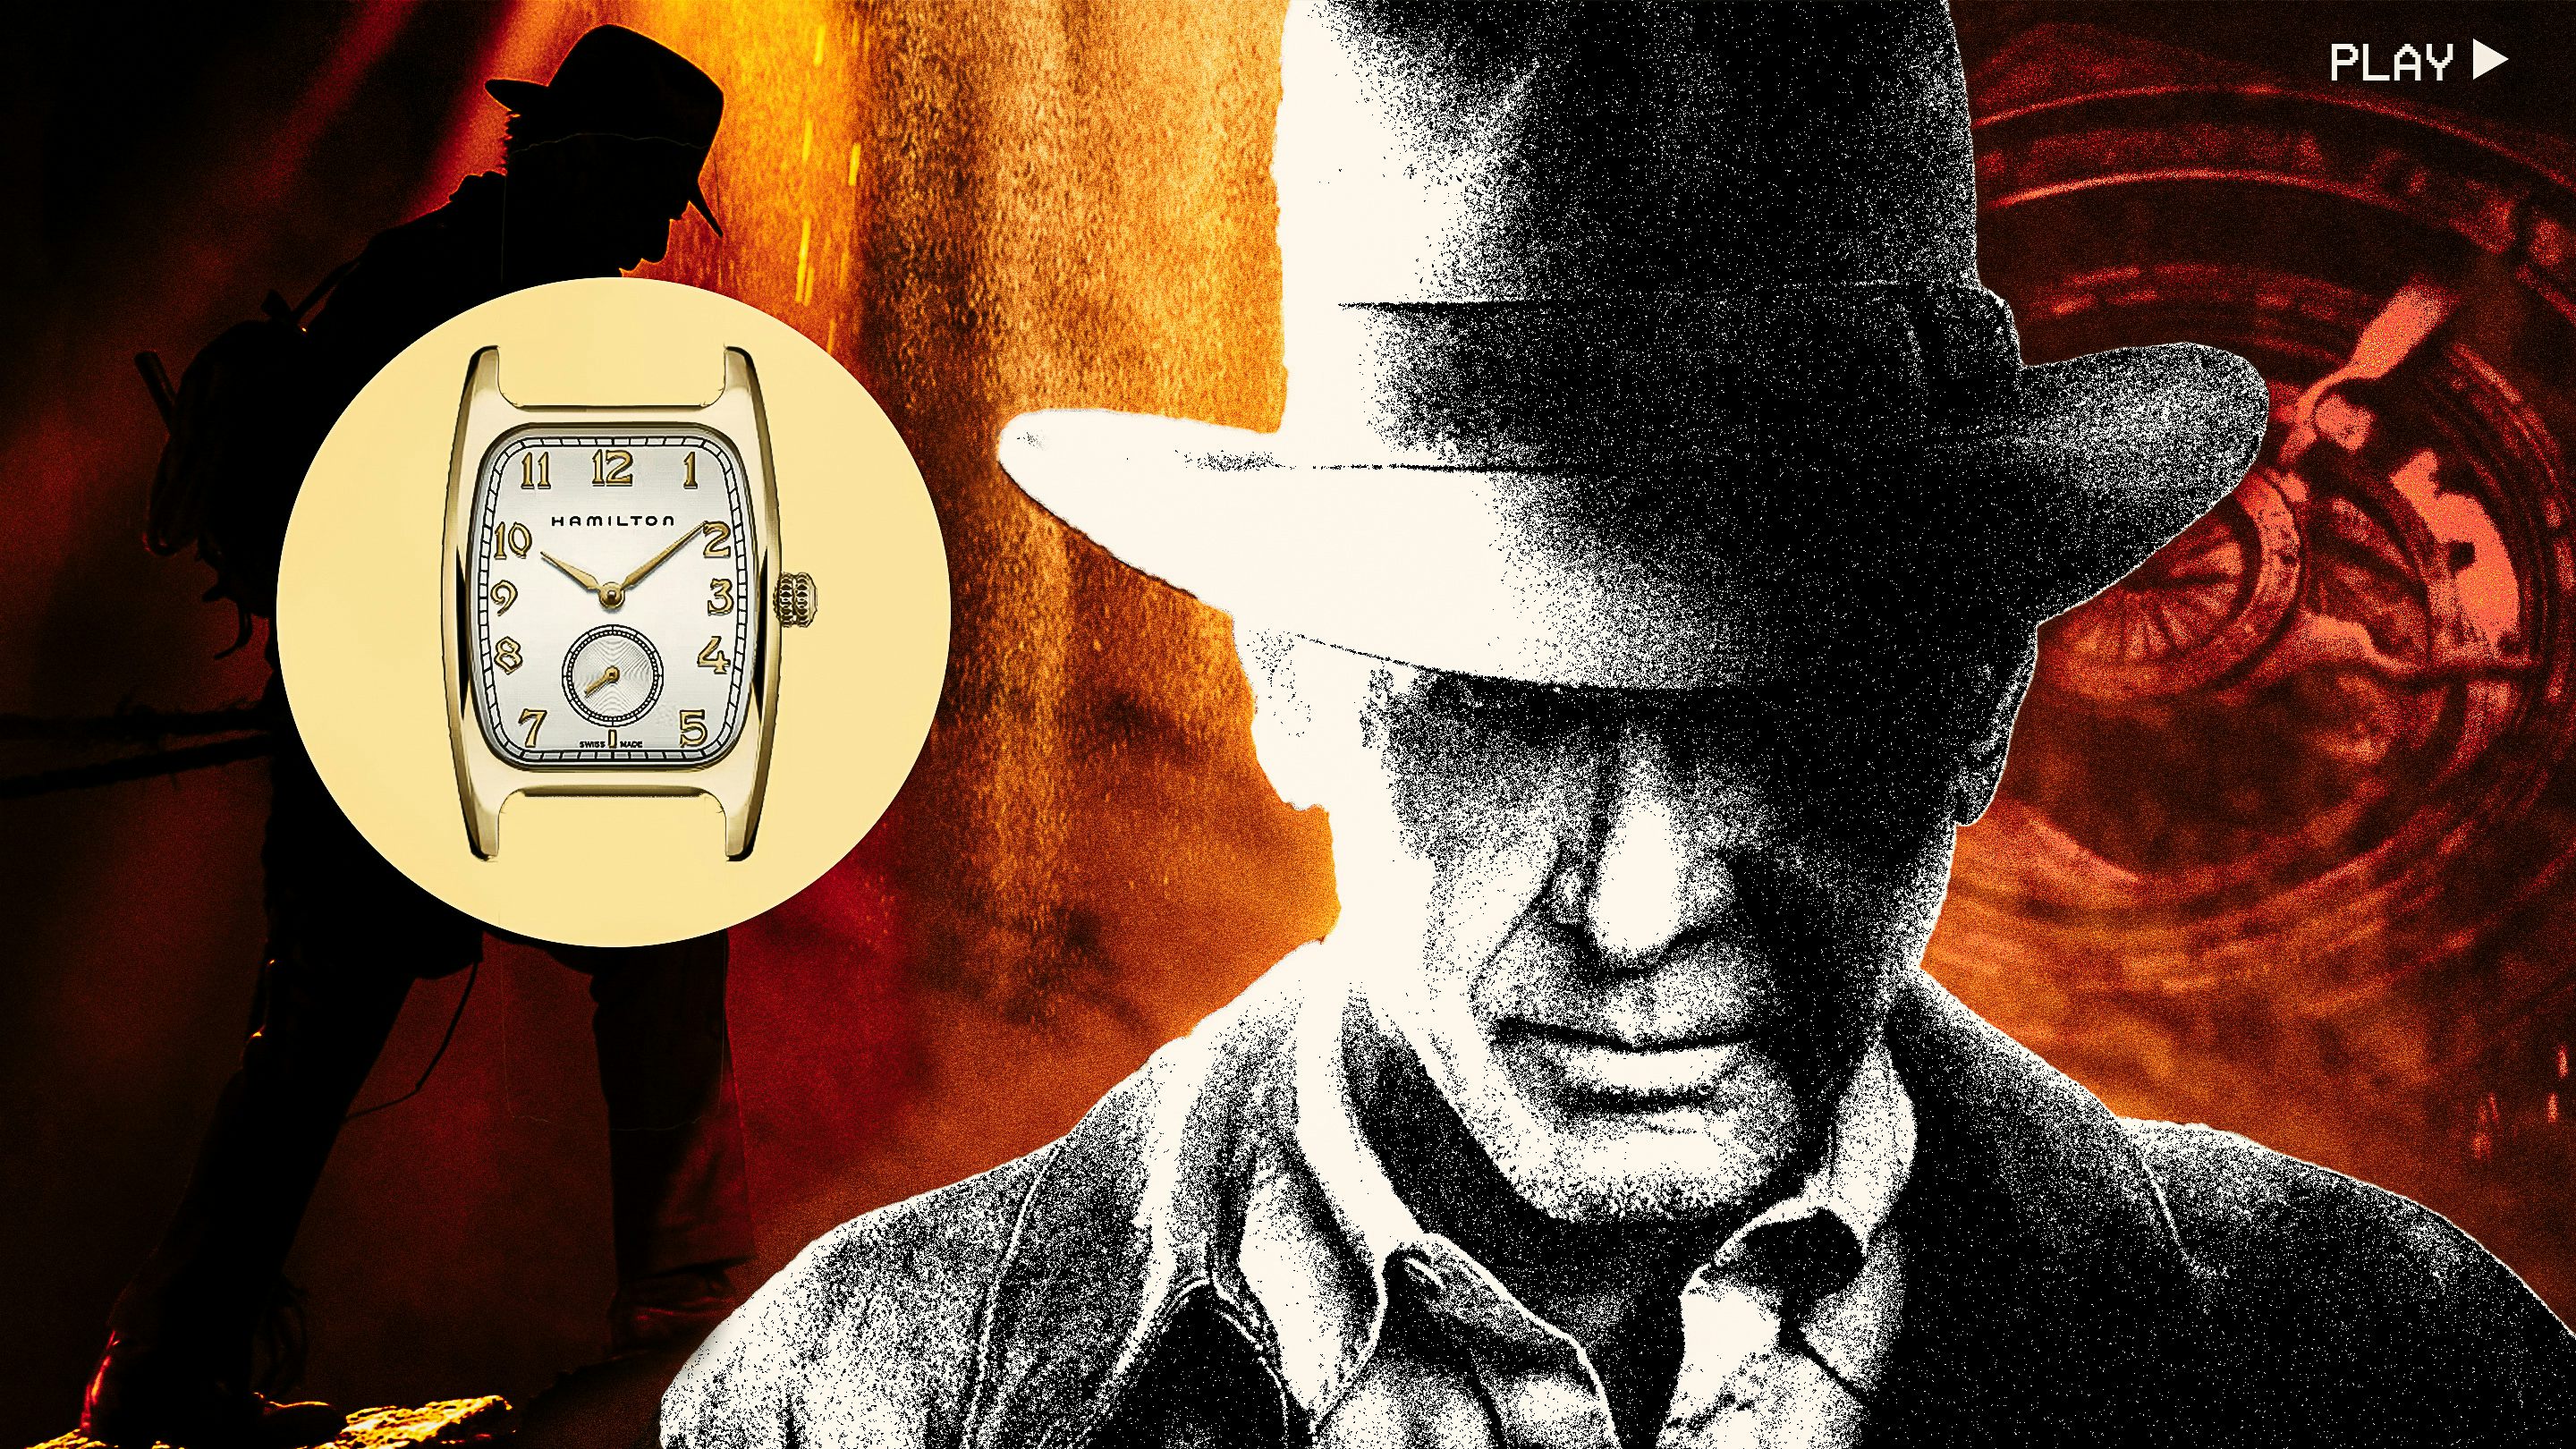 Why You Should See 'Indiana Jones and the Dial of Destiny